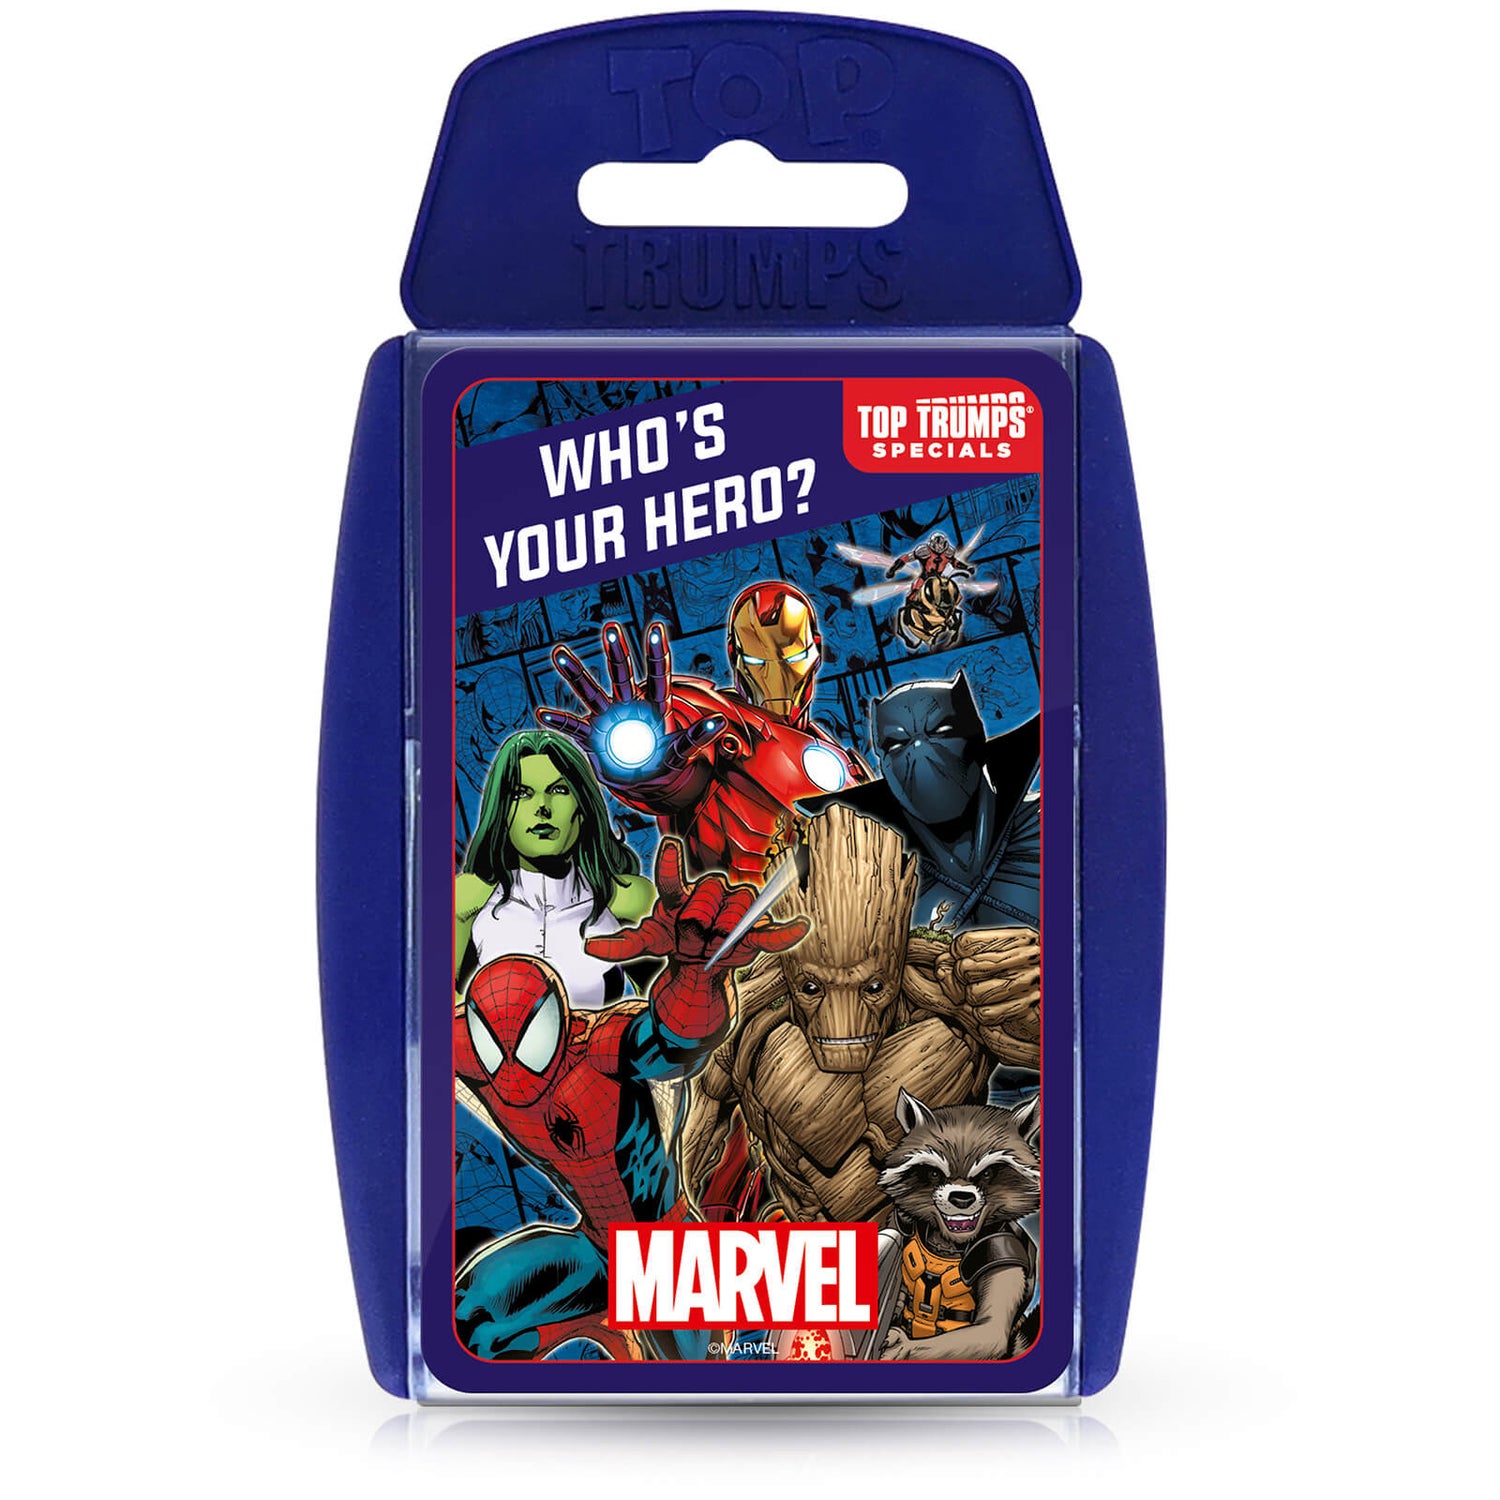 Top Trumps Card Game - Marvel Universe Edition